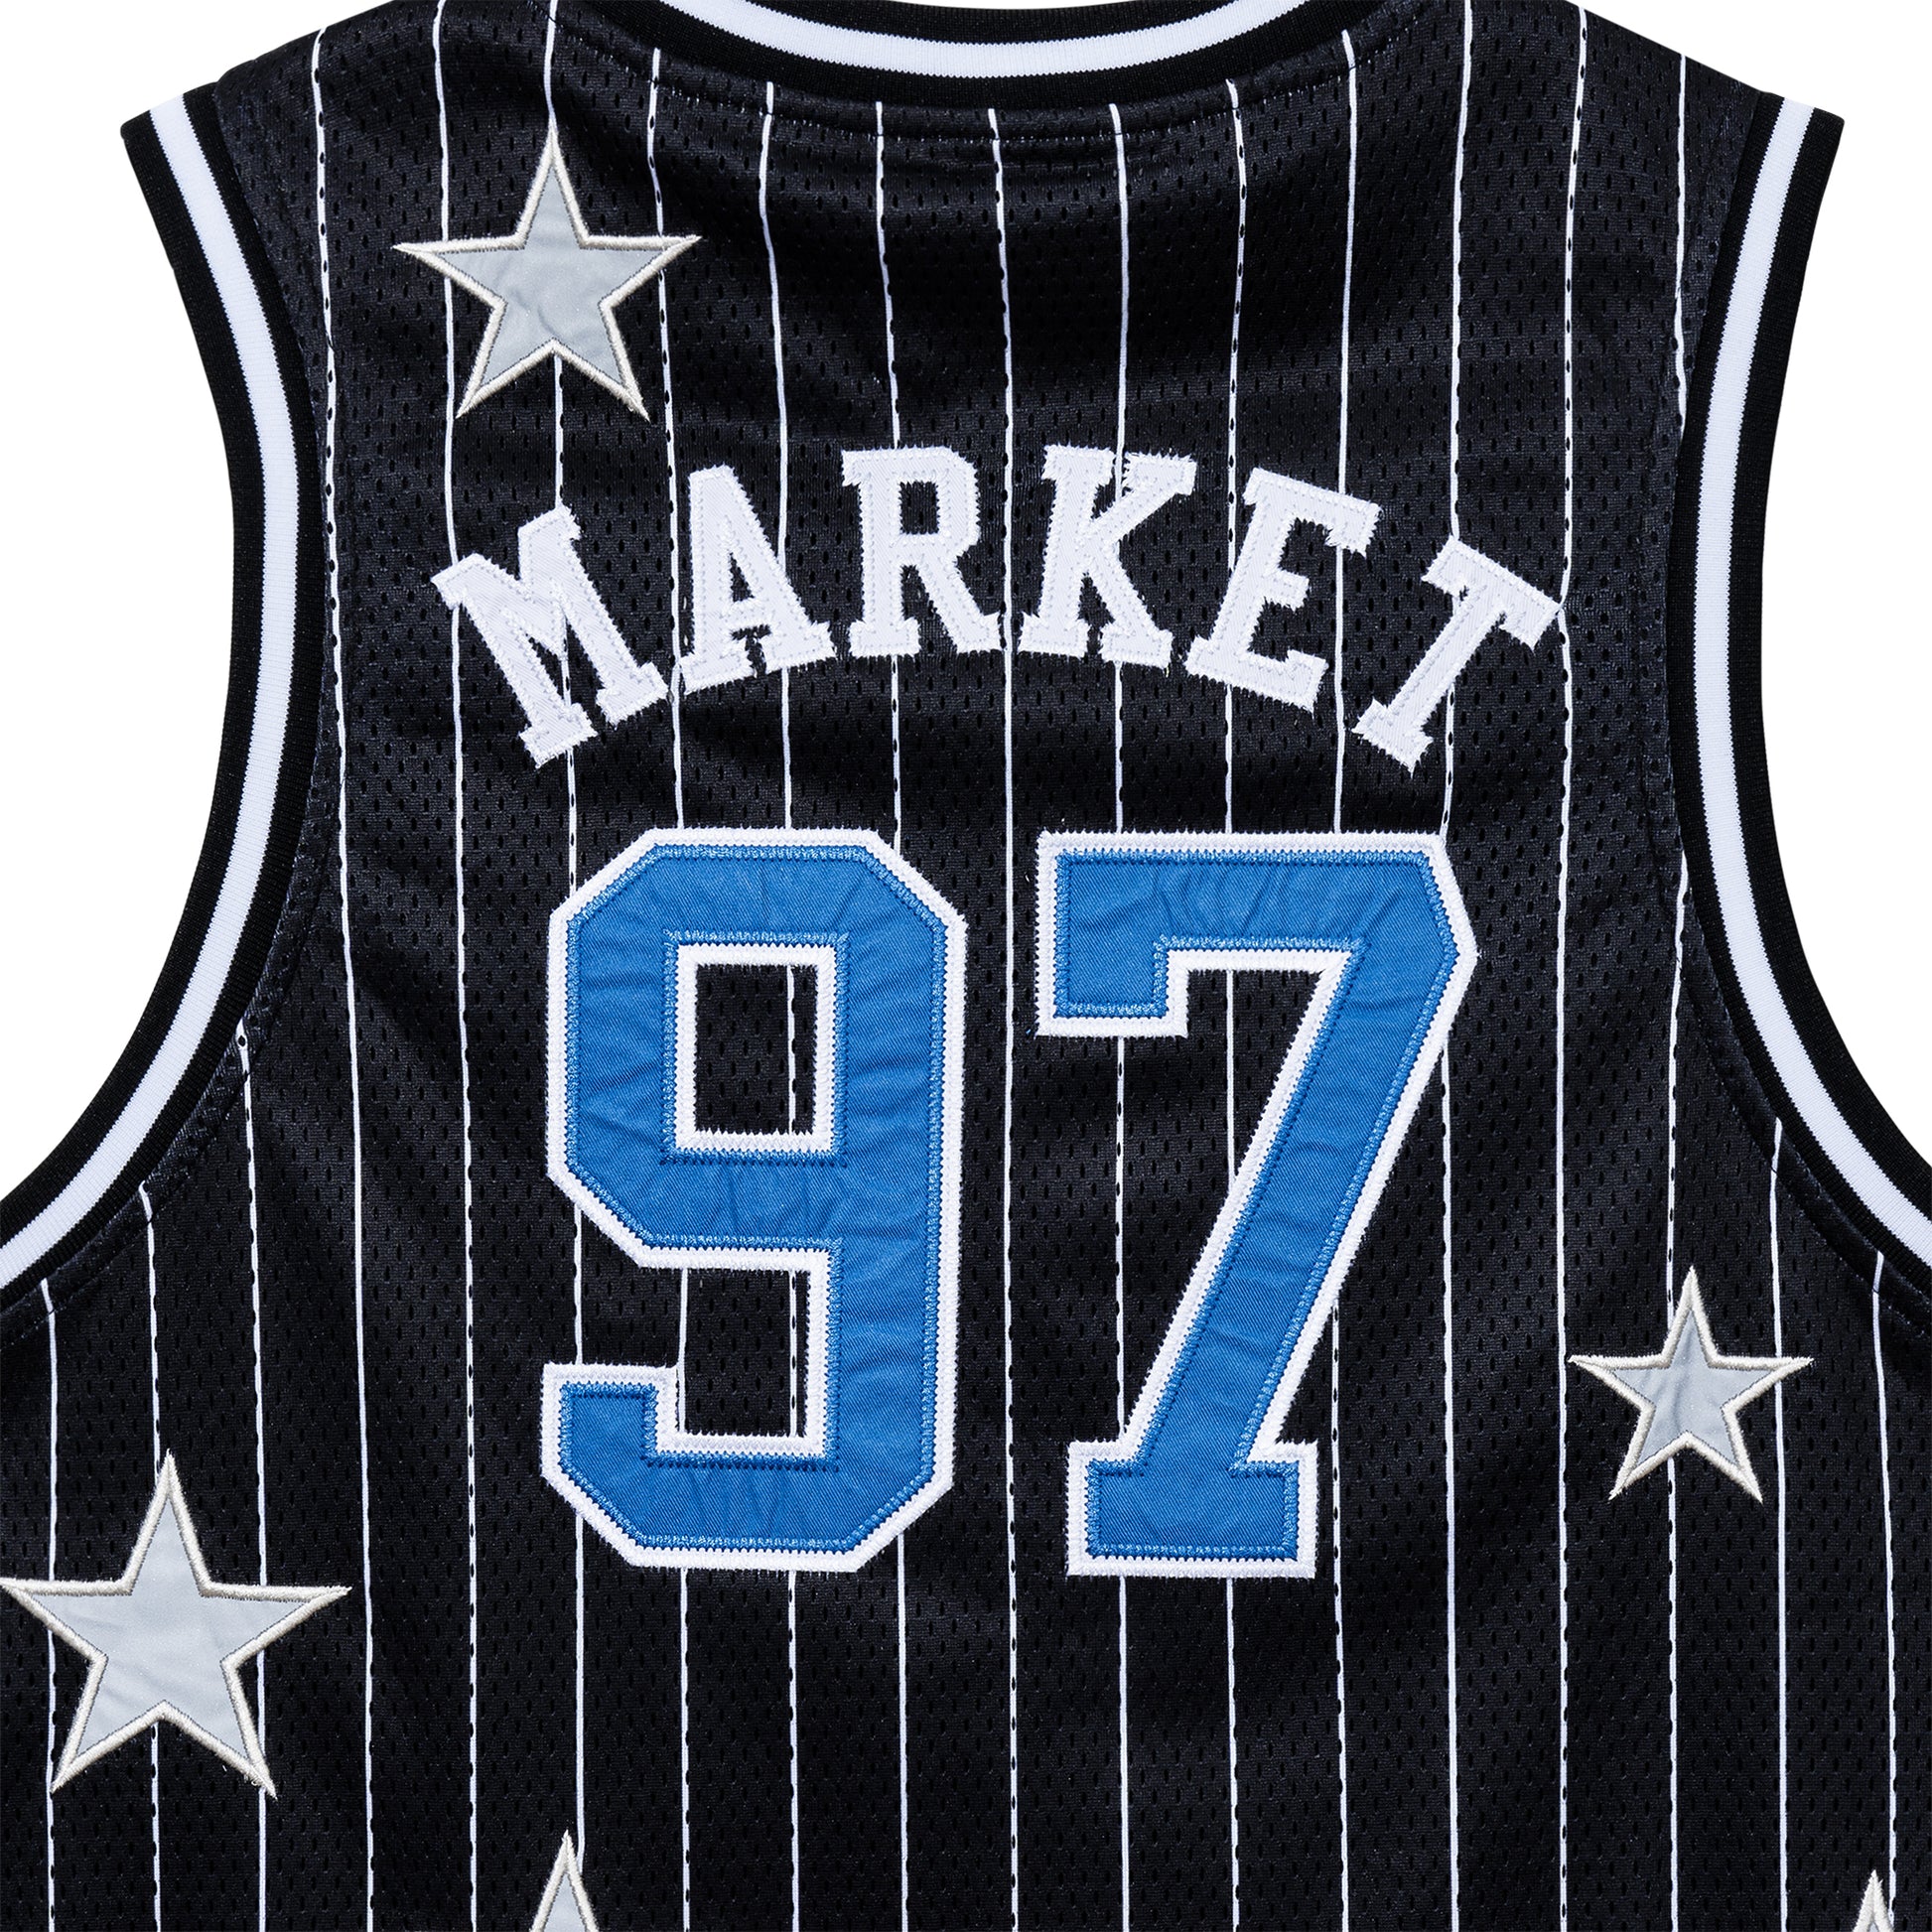 MARKET clothing brand BIG DIESEL JERSEY. Find more basketballs, sporting goods, homegoods and graphic tees at MarketStudios.com. Formally Chinatown Market. 